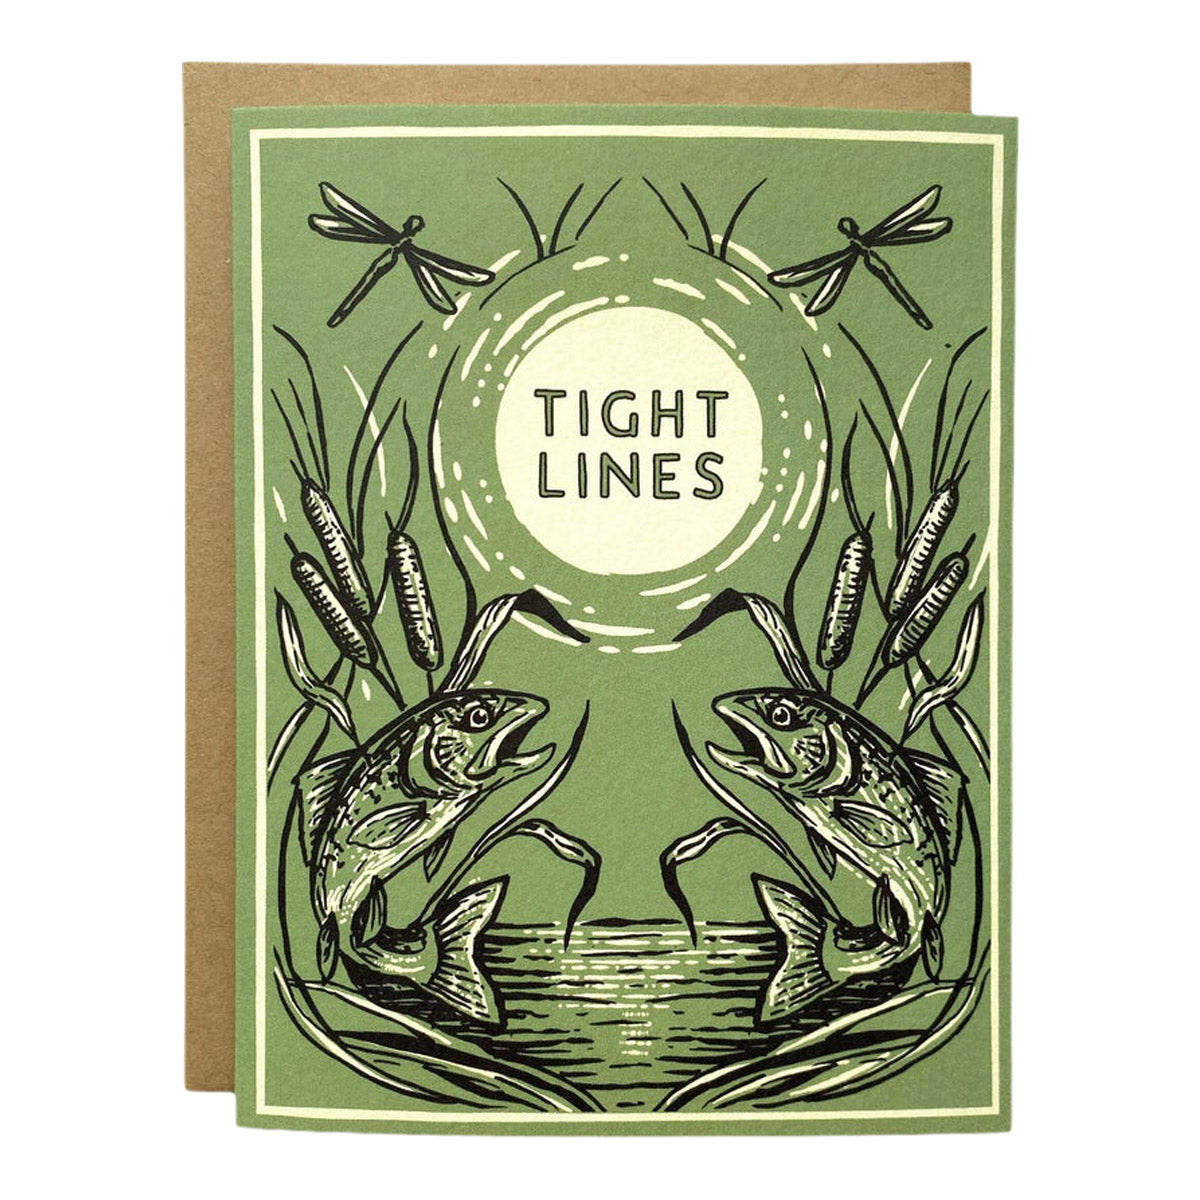 The Wild Wander Tight Lines Greeting Card